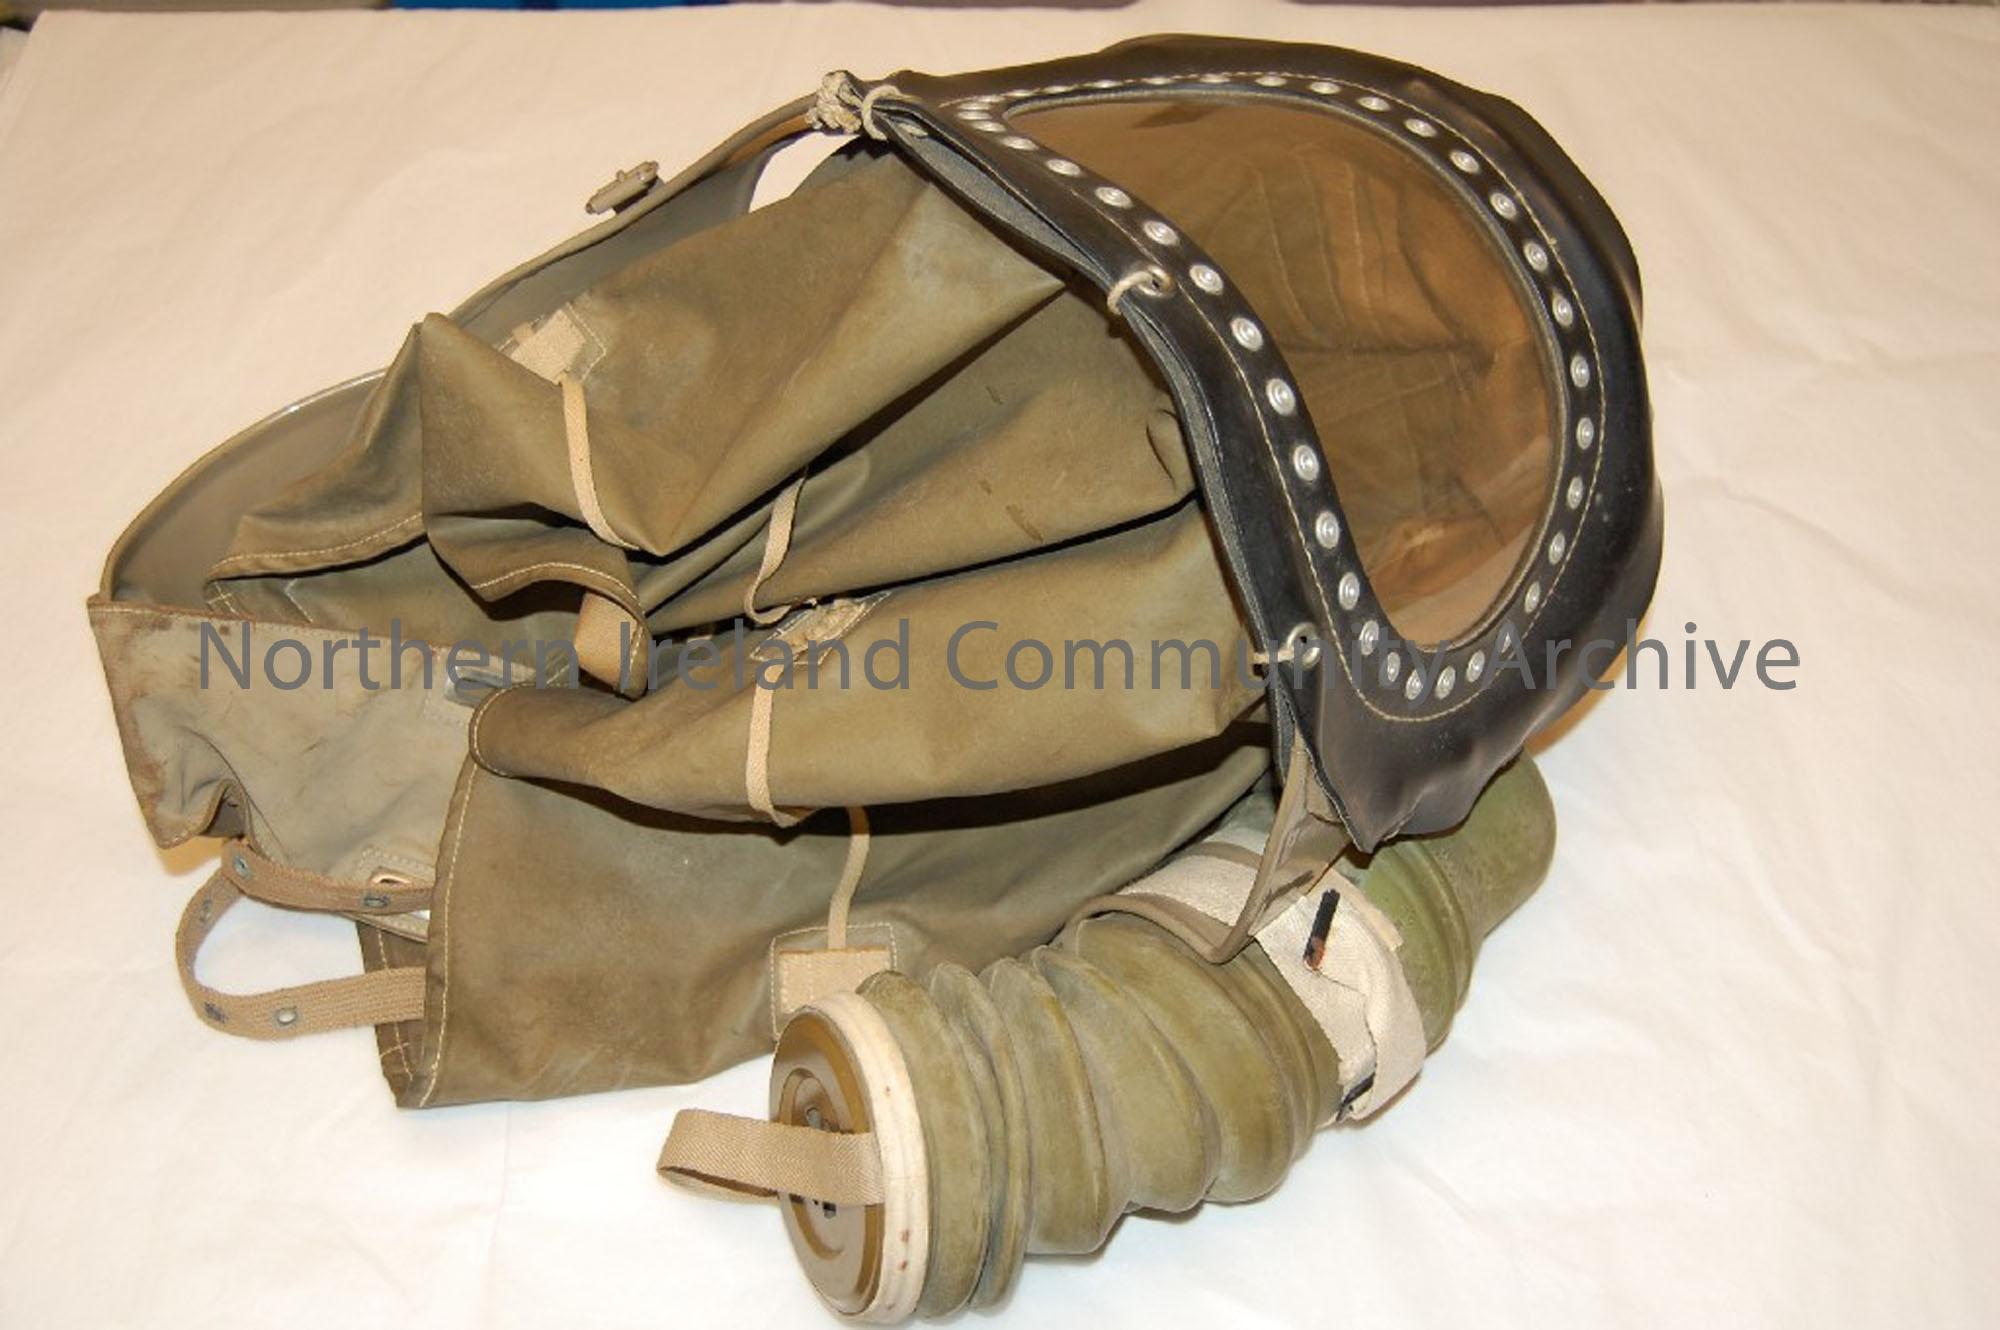 Gas mask for a baby, World War II, with original cardboard box packaging